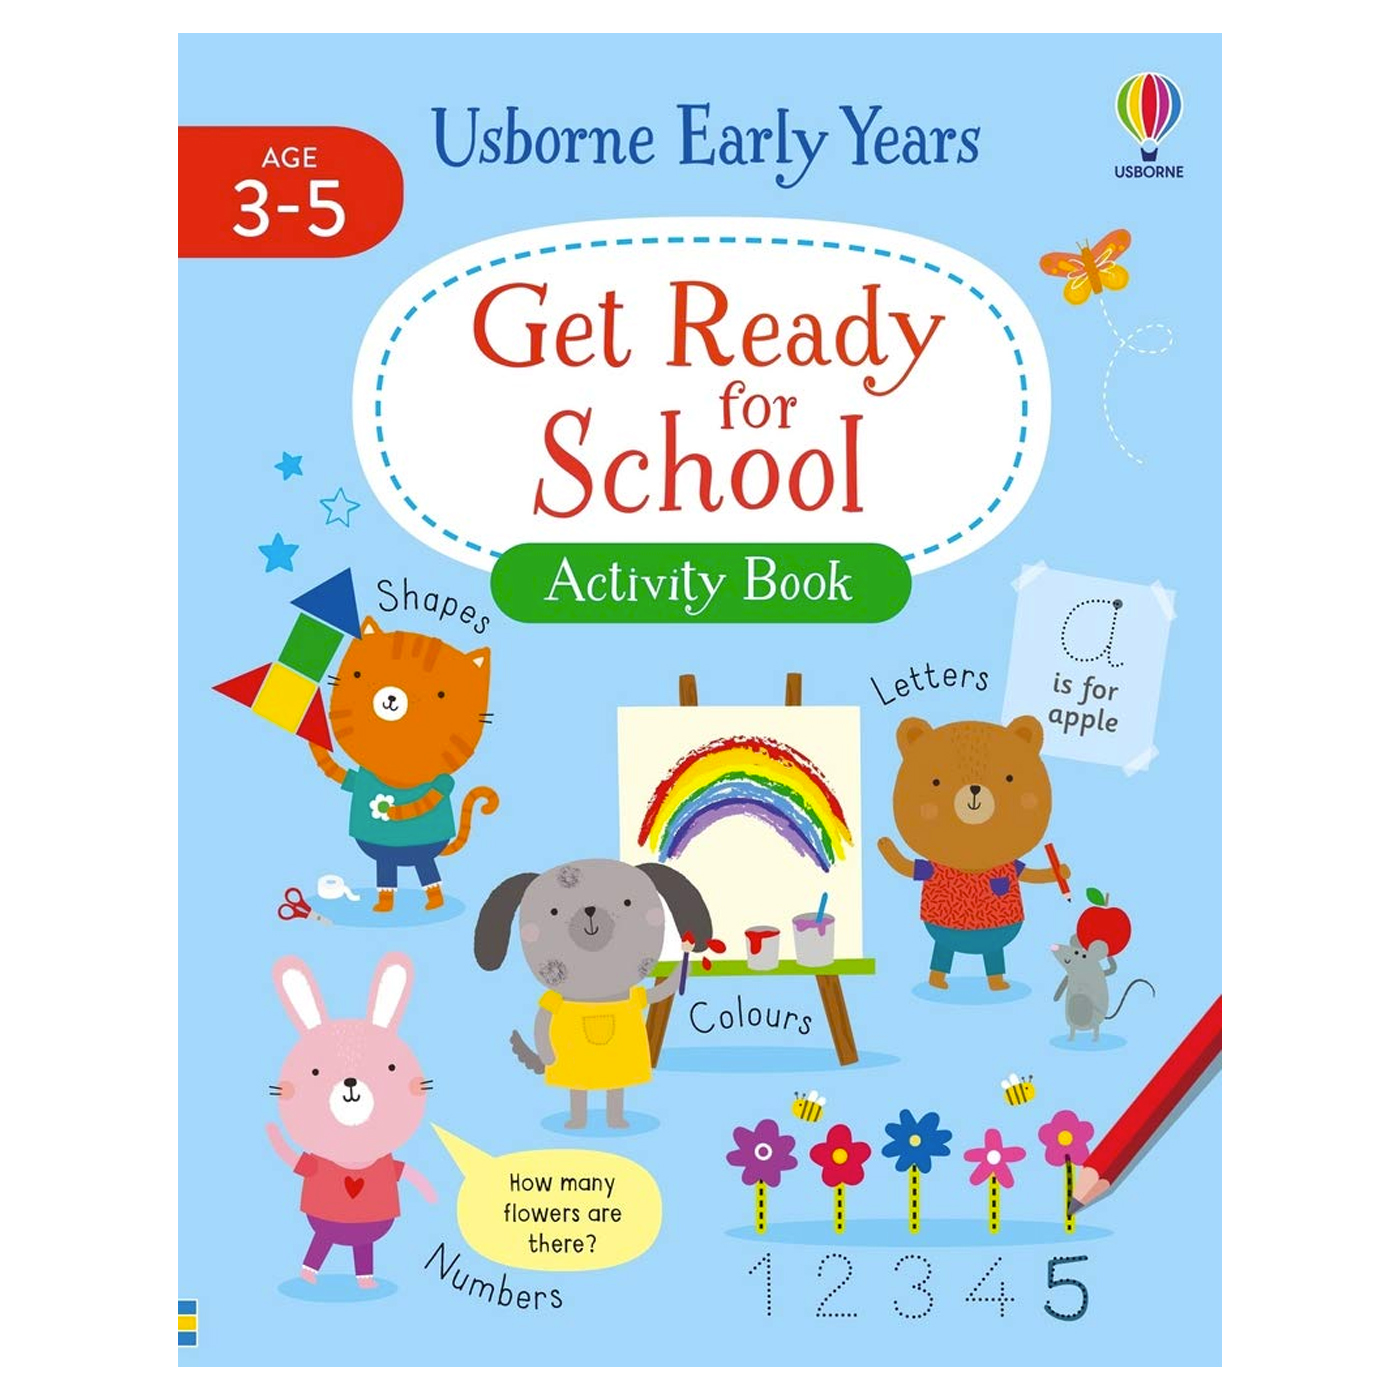  Get Ready for School Activity Book